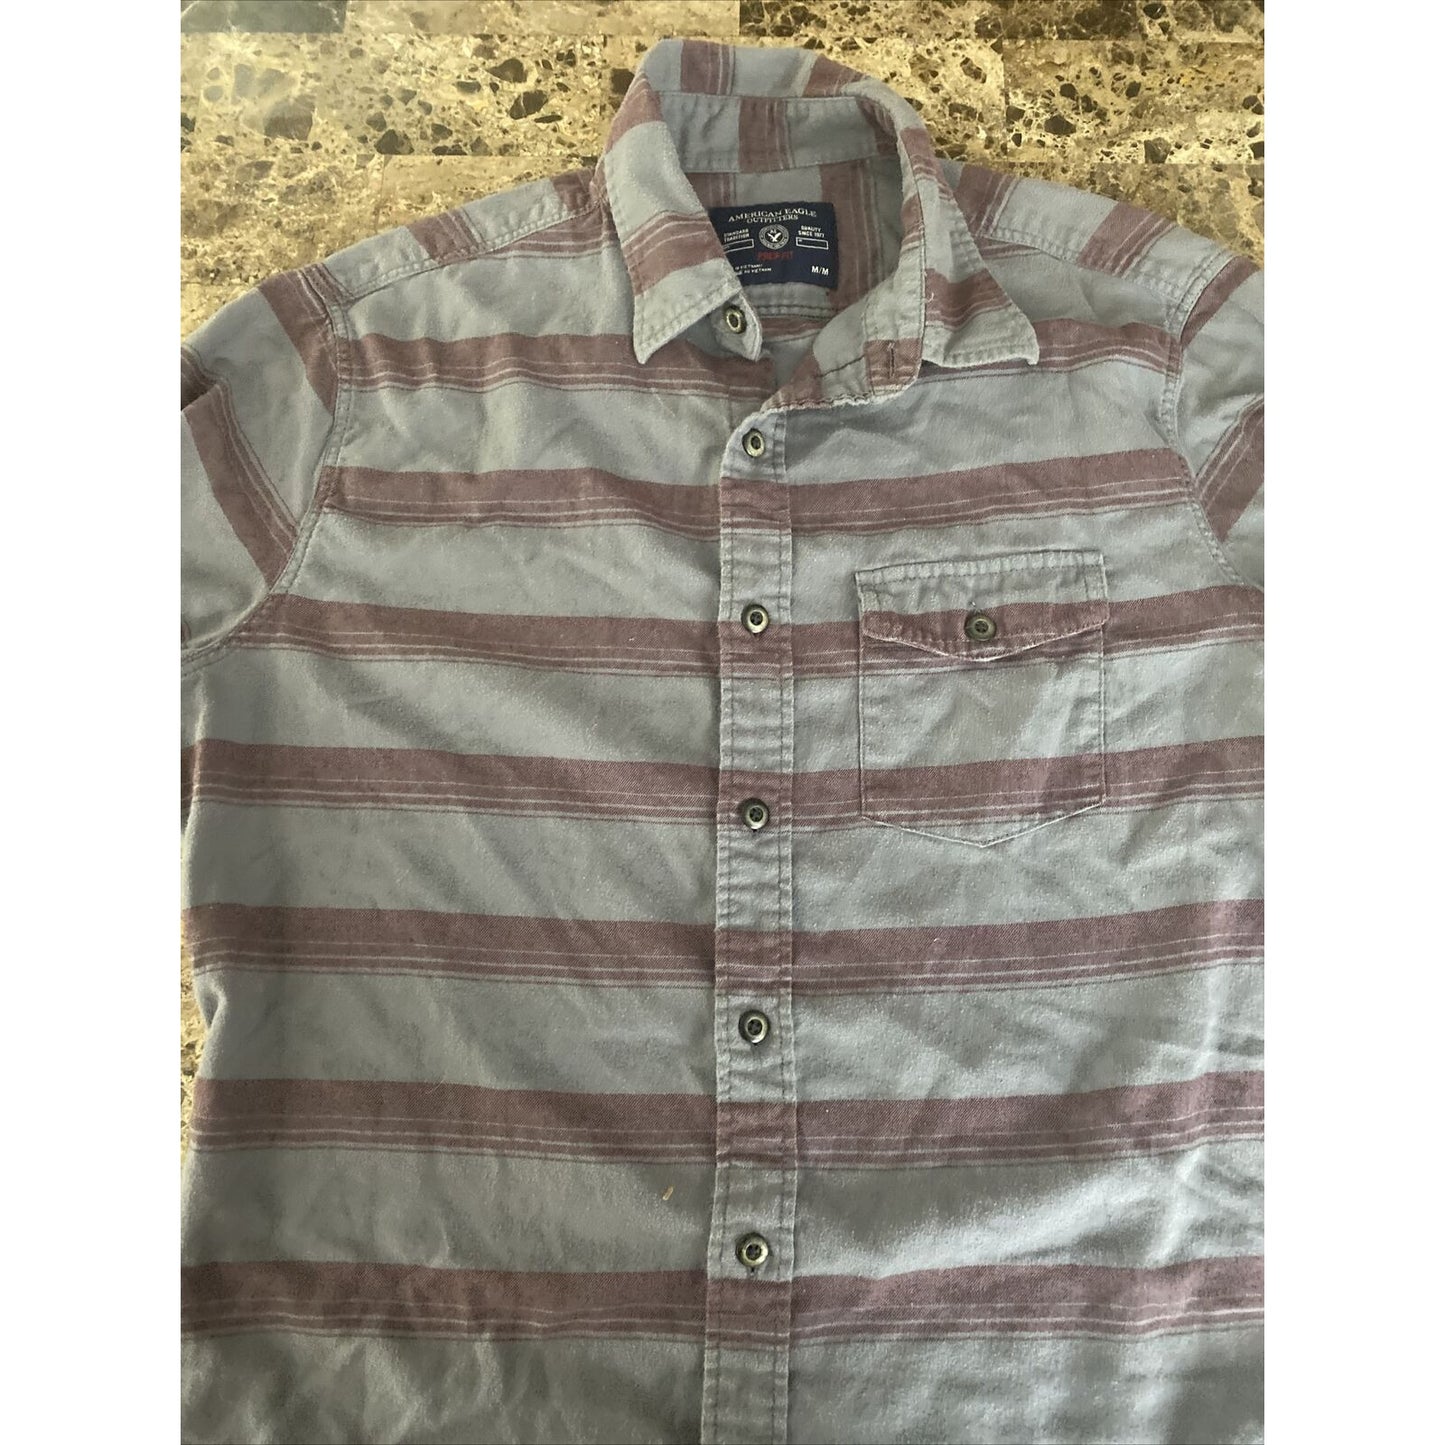 American Eagle Outfitters Men’s Medium Red Gray Stripes Prep Fit Long Sleeves